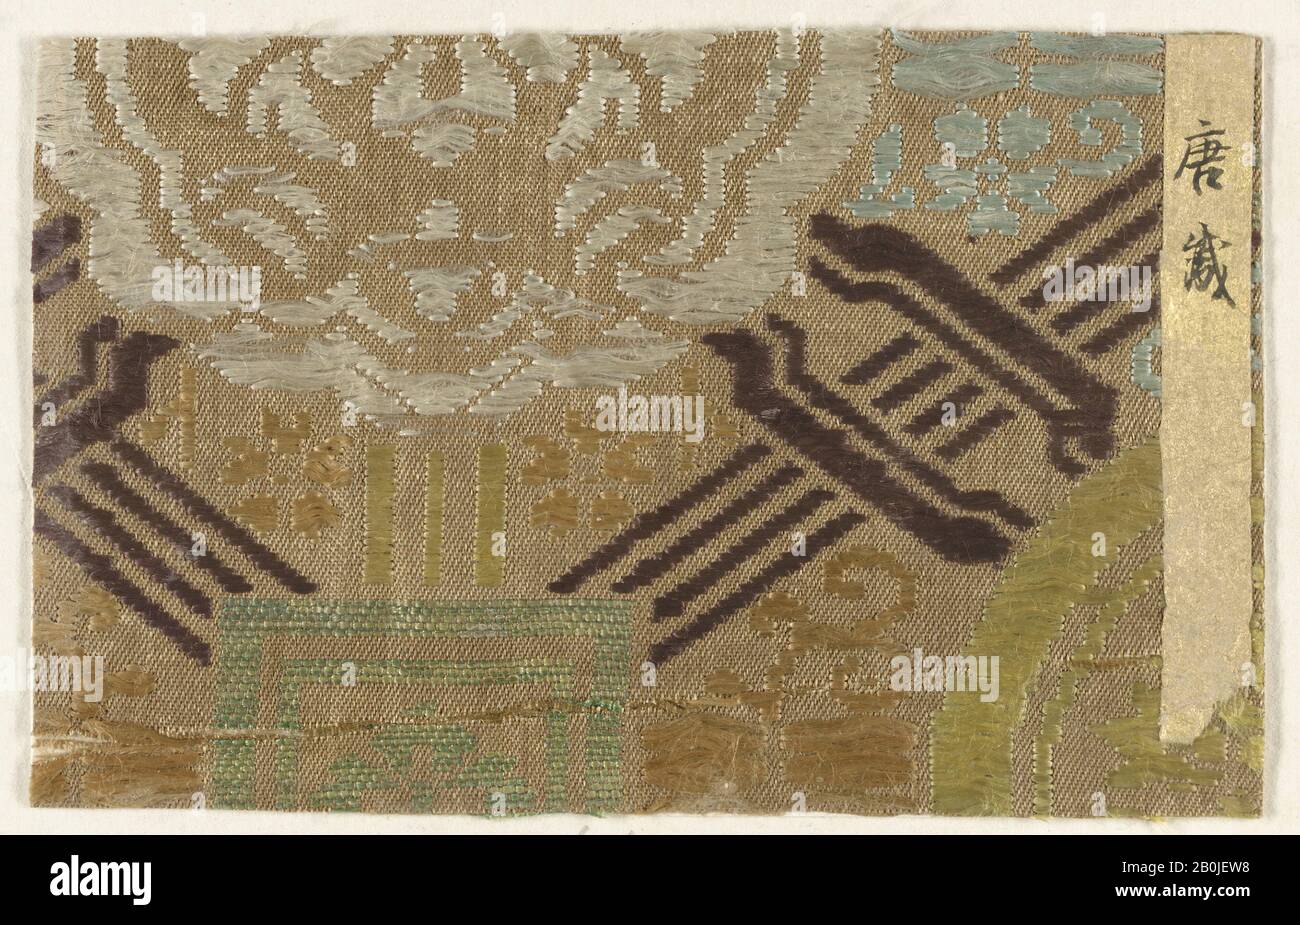 Piece, Japan, 17th century, Japan, Silk, Compound weave, 2 3/8 × 3 3/4 in. (6 × 9.5 cm), Textiles-Woven Stock Photo